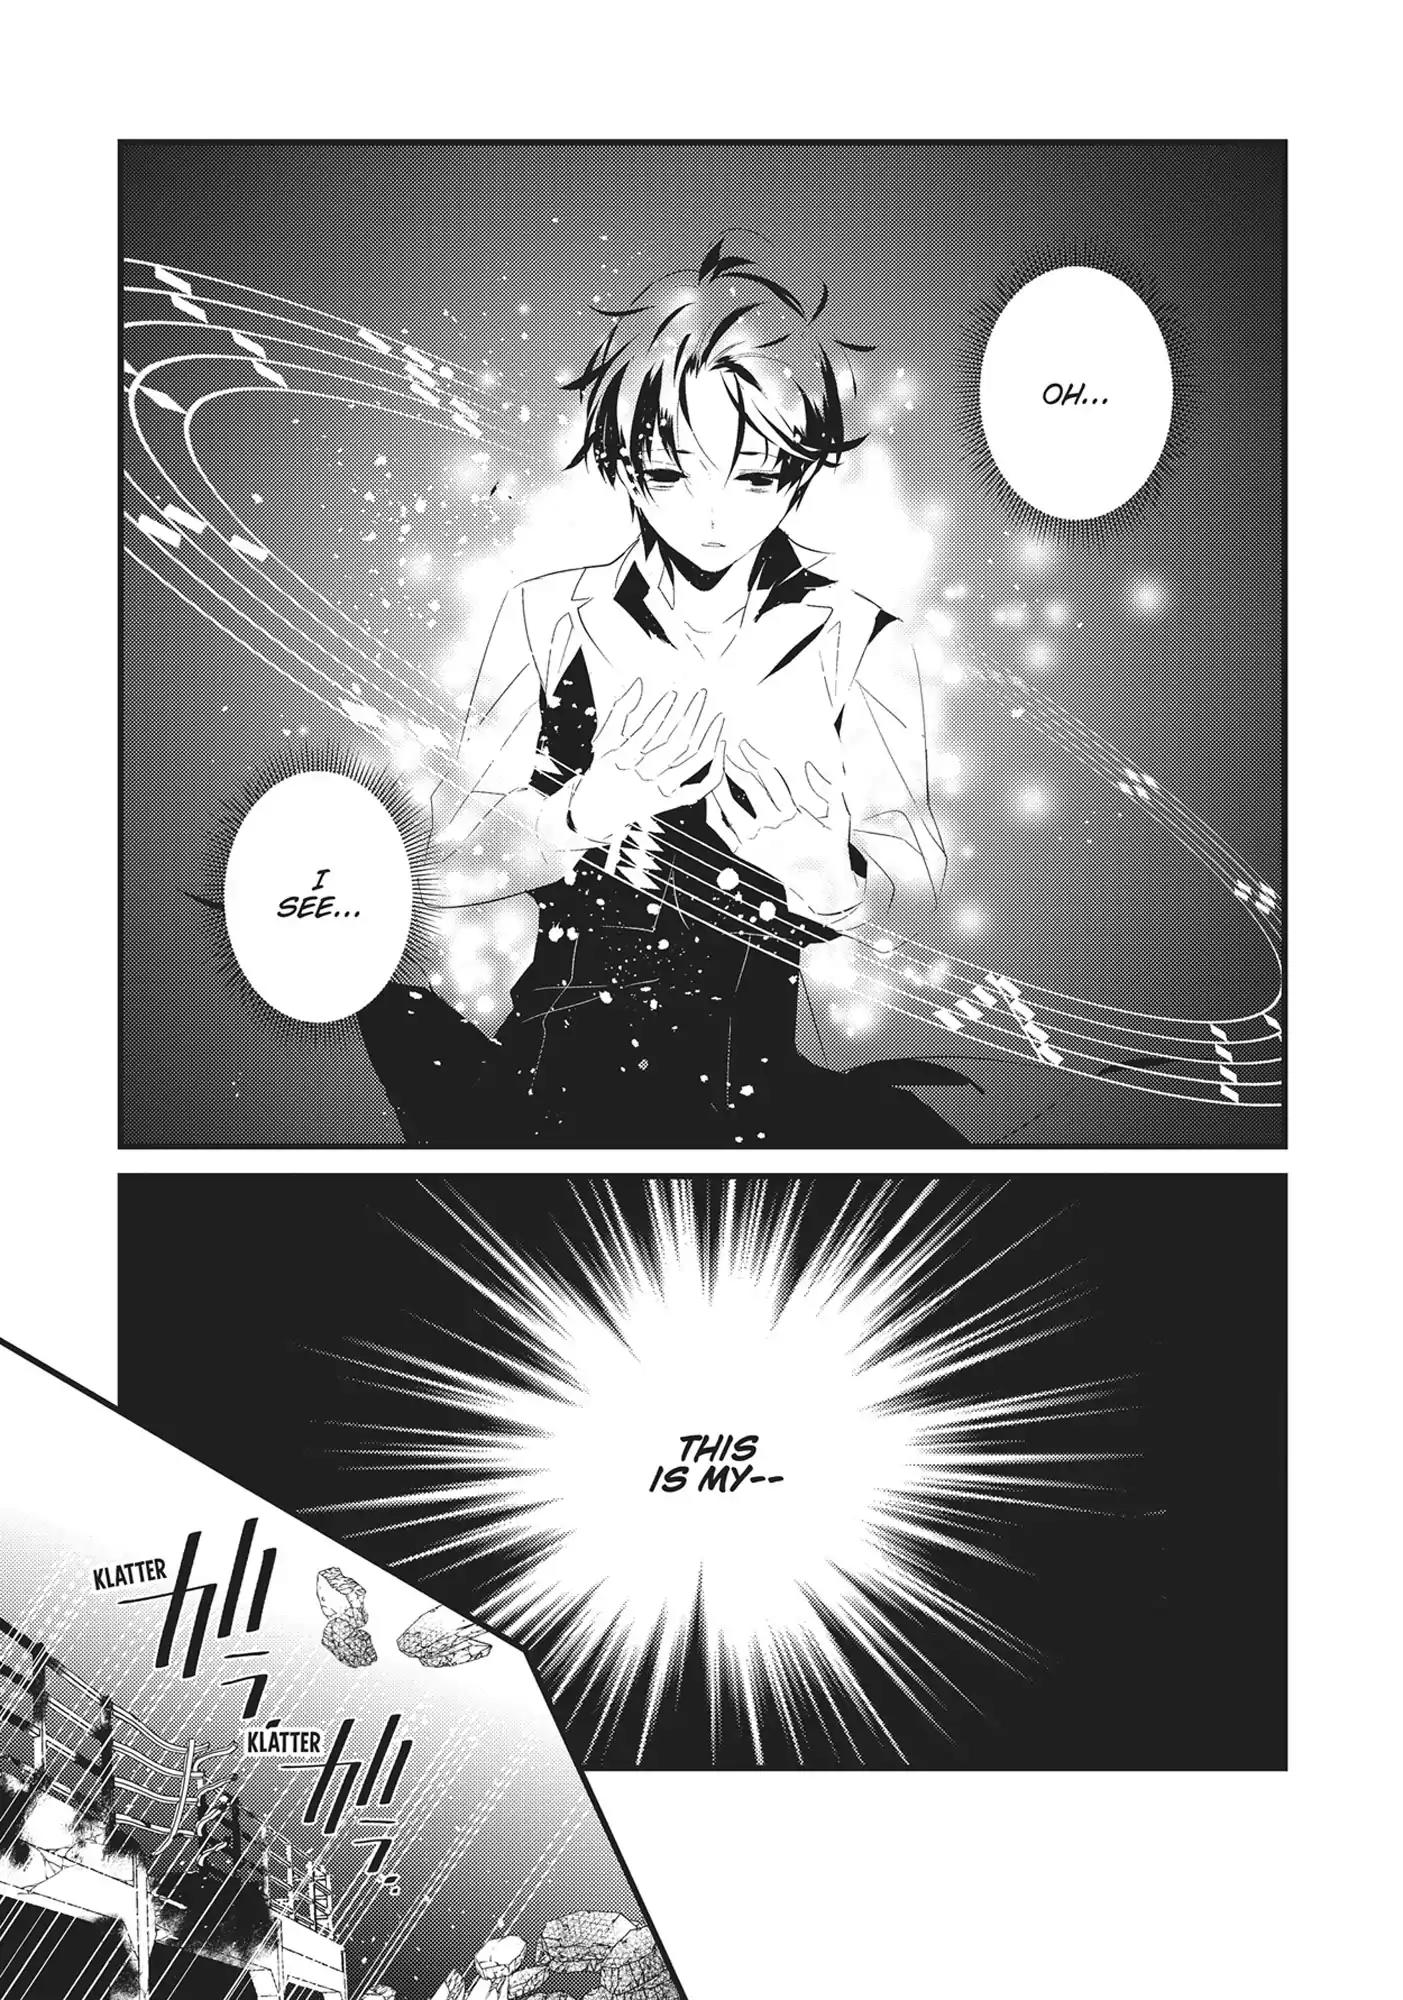 Magia the Ninth Vol.2 Chapter 10: